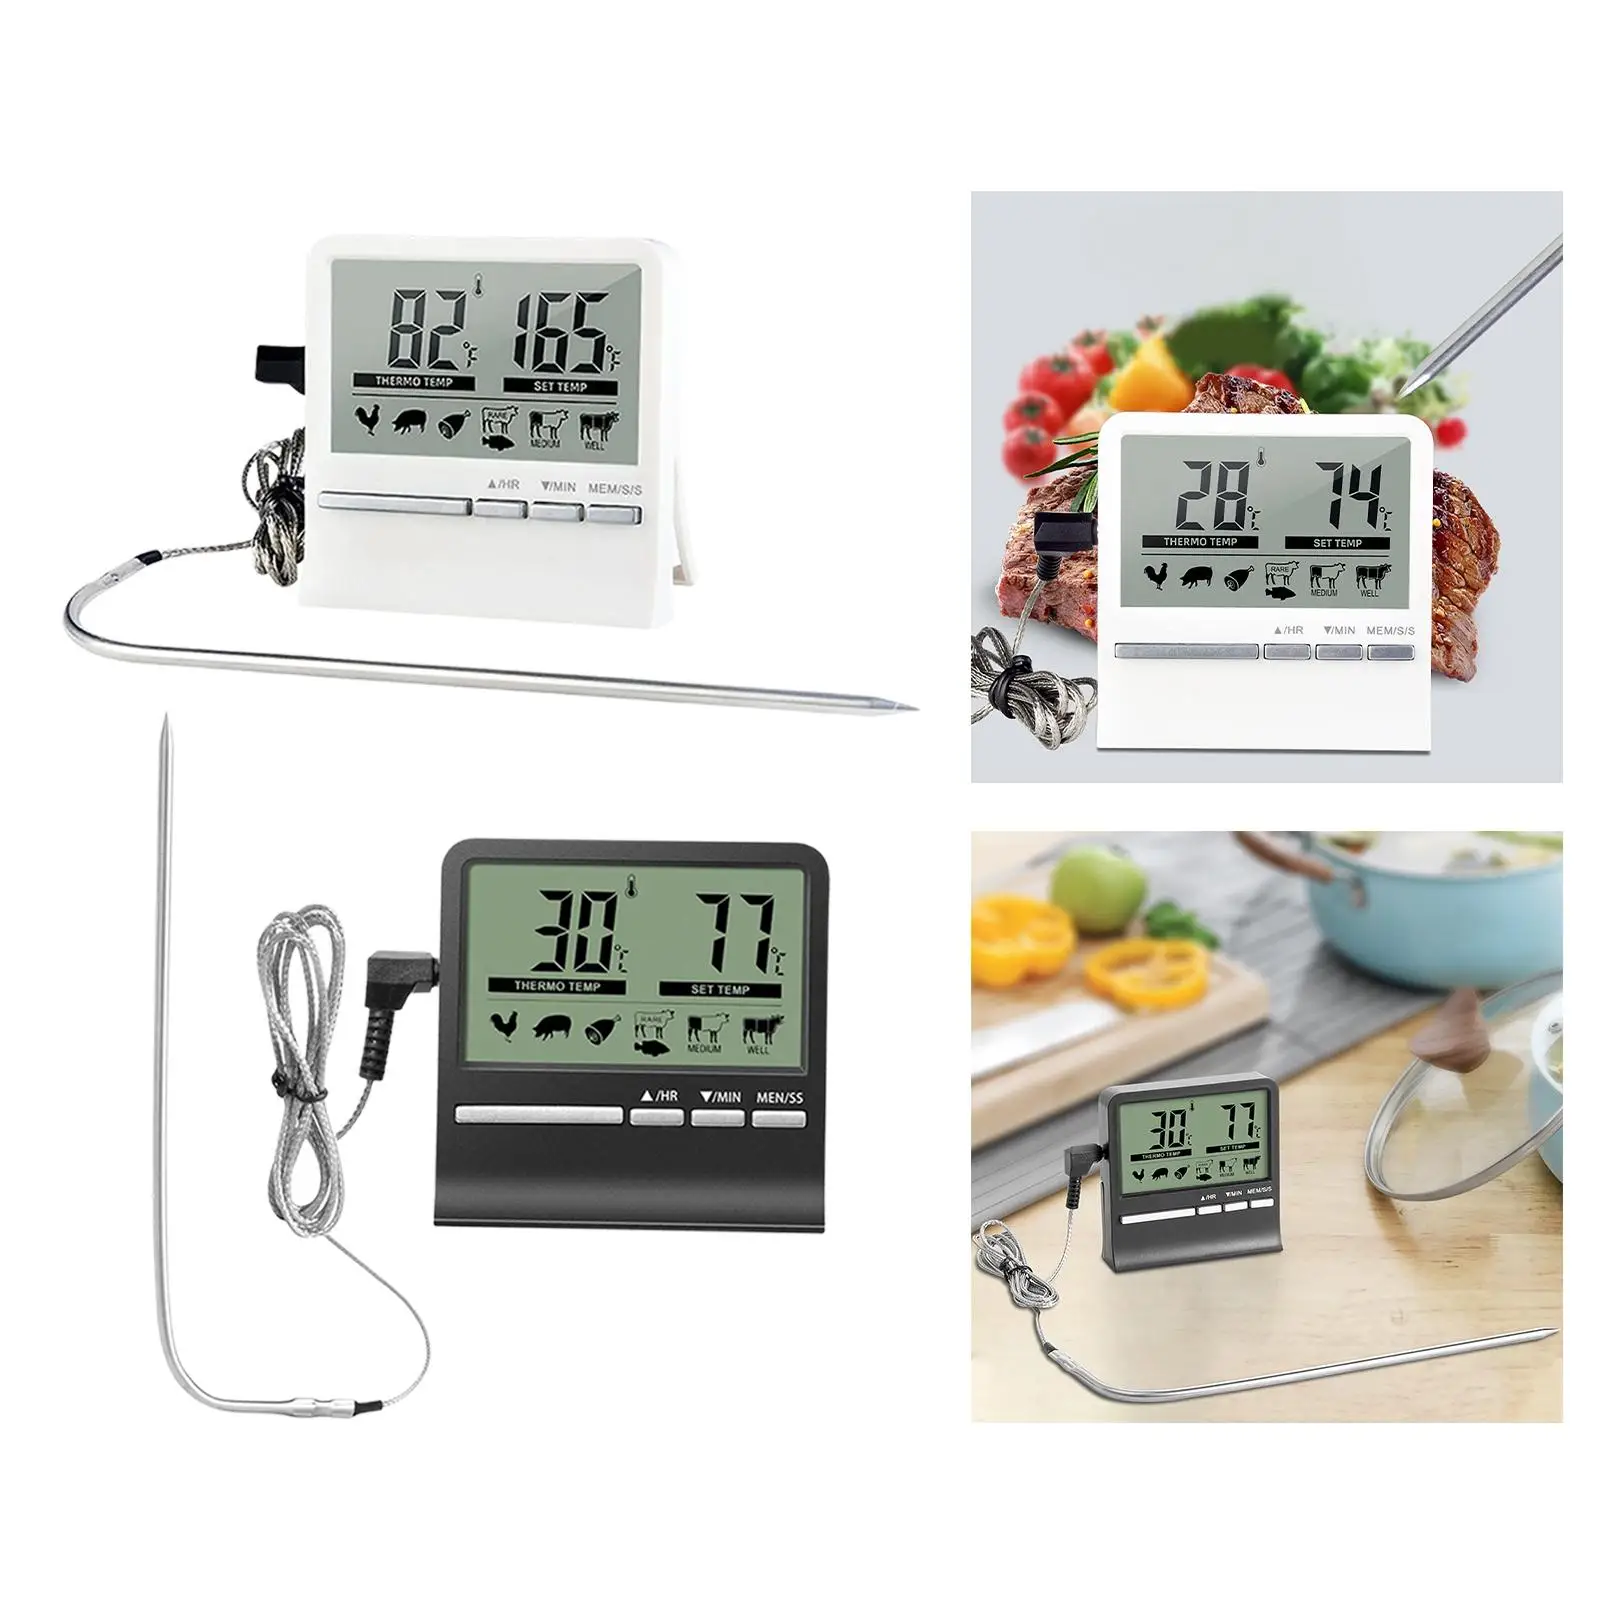  Thermometer 0-250°C/32-482°F with Temperature Probe LCD Display Grill Thermometer for Oven BBQ, Kitchen, 